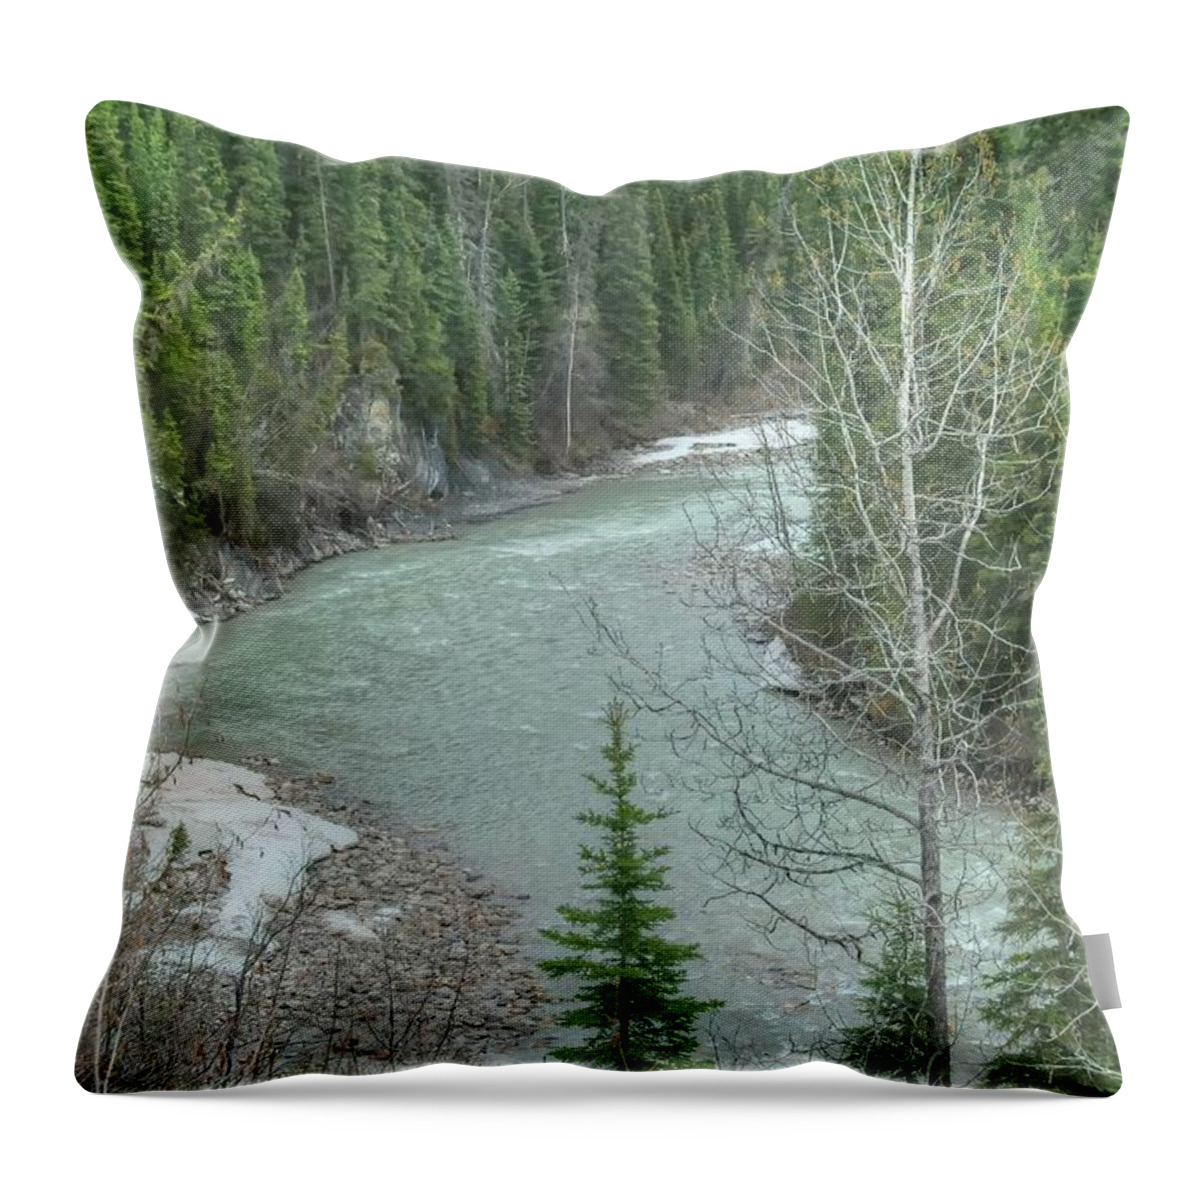 Ft. Nelson Throw Pillow featuring the photograph Ft. Nelson British Columbia by Dyle Warren